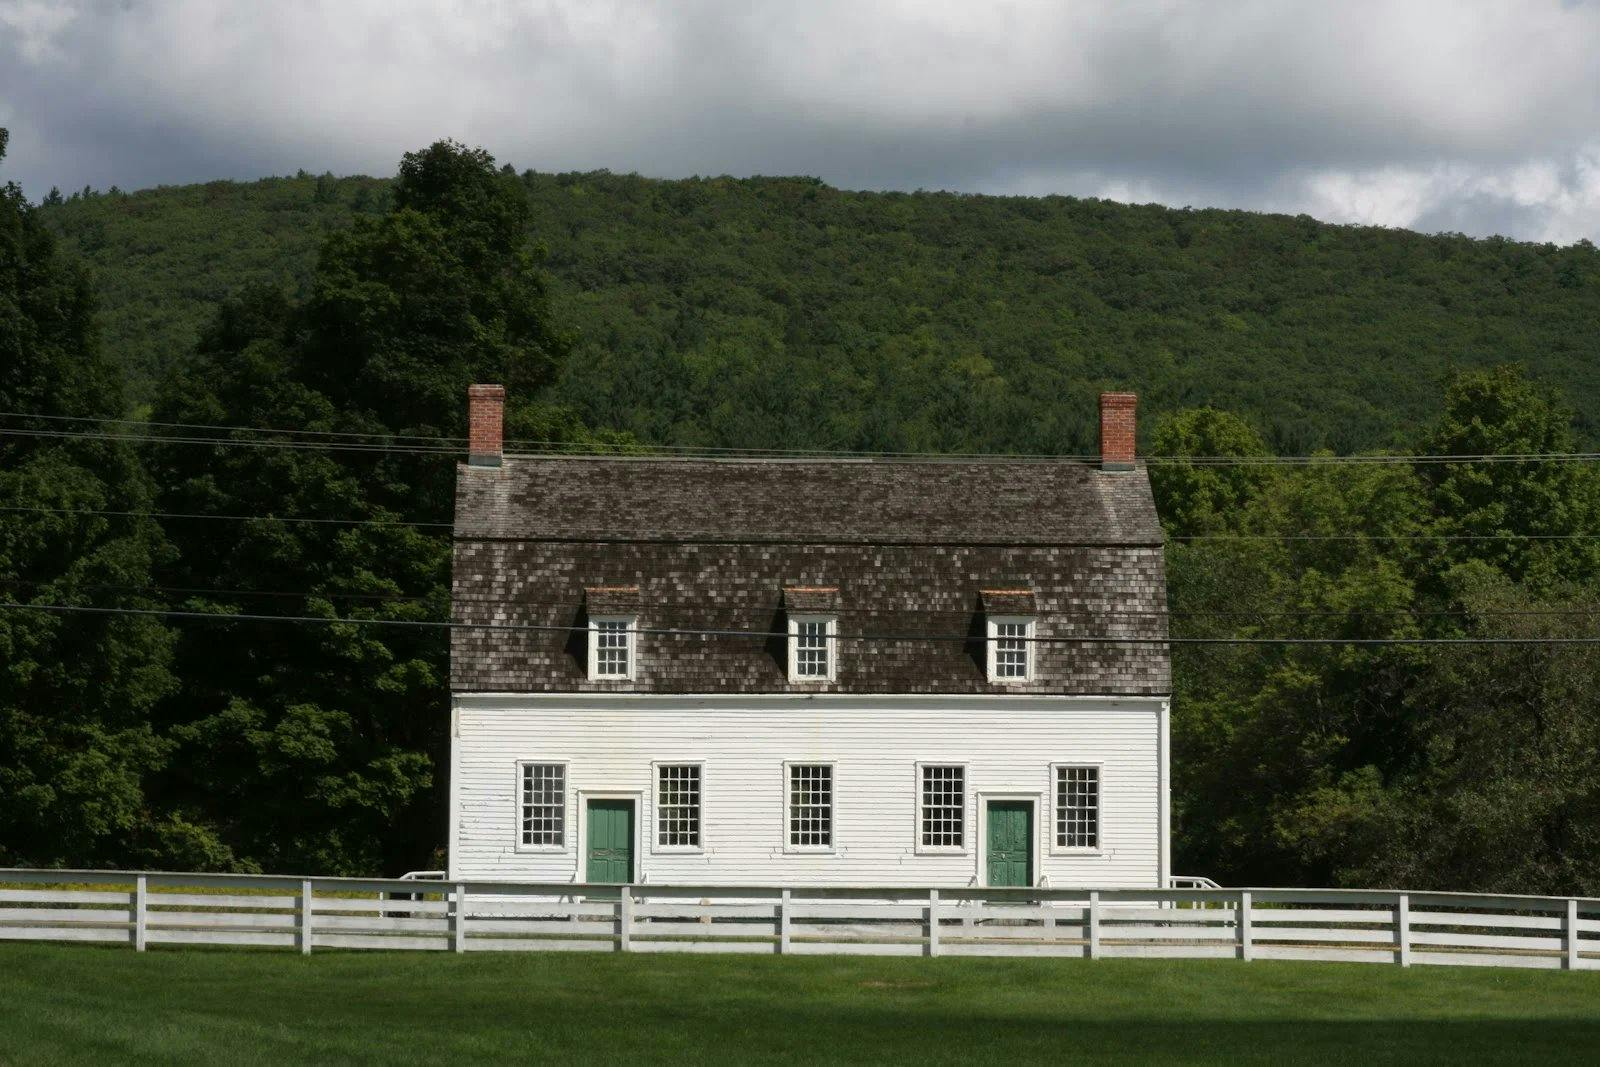 <h3><strong>Origins and Historical Significance</strong></h3><p>The story of Hancock Shaker Village unfolds like a well-preserved chapter from the past. Imagine lush green landscapes, rustic wooden structures, and a community bound by faith and hard work. Here’s a glimpse into its fascinating history:</p><h4><strong>1. The Birth of a Commune</strong></h4><p>In the late <strong>1780s</strong>, the Shakers—a religious sect known for their simplicity, craftsmanship, and communal living—established Hancock Shaker Village. The village spanned across the towns of <strong>Hancock, Pittsfield, and Richmond</strong>. These devoted individuals believed in equality, celibacy, and a life dedicated to God.</p><h4><strong>2. A Living-History Museum</strong></h4><p>Fast forward to today, and Hancock Shaker Village stands as a <strong>living-history museum</strong> that transports visitors back in time. As you step onto its sprawling <strong>750-acre</strong> grounds, you’ll encounter a world where the past comes alive:</p><ul><li><strong>Authentic Shaker Buildings</strong>: Wander through <strong>20 meticulously restored Shaker buildings</strong>, each echoing with whispers of the past. From the simple meetinghouse to the functional barns, these structures reveal the Shakers’ commitment to craftsmanship and practicality.</li><li><strong>Costumed Interpreters</strong>: Meet friendly interpreters clad in period attire. They share stories, demonstrate traditional crafts, and invite you to participate in daily tasks. It’s like stepping into a time capsule.</li><li><strong>Shaker Artifacts</strong>: The village houses an impressive collection of <strong>Shaker furniture, tools, and artifacts</strong>. Rotating exhibits showcase their exquisite craftsmanship and ingenious designs. Don’t miss the iconic ladder-back chairs and intricately woven baskets.</li><li><strong>A Farmstead Experience</strong>: Stroll along the <strong>mile-long hiking trail</strong> that winds through meadows and woodlands. Along the way, you’ll encounter a <strong>working farm</strong>—complete with heritage-breed livestock and vibrant gardens. The Shakers were skilled farmers, and their legacy lives on here.</li><li><strong>The Simple Life</strong>: The Shakers believed in simplicity. Their furniture, architecture, and lifestyle reflected this ethos. As you explore, notice the clean lines, functional designs, and absence of unnecessary ornamentation.</li></ul><h4><strong>3. Practical Details</strong></h4><ul><li><strong>Location</strong>: 1843 W Housatonic St, Pittsfield, MA, 01201</li><li><strong>Opening Hours</strong>: Monday to Friday, 9:00 AM to 5:00 PM</li><li><strong>Phone Number</strong>: (413) 443-0188</li></ul><h4><strong>Visitor Reviews</strong></h4><p>With a stellar rating of <strong>4.5 stars</strong> based on <strong>803 reviews</strong>, Hancock Shaker Village has left an indelible mark on countless visitors. Whether you’re a history enthusiast, an architecture lover, or simply curious about the Shaker way of life, this village promises an enriching experience.</p><p><br></p><p>So, pack your imaginary bags, step into your mental time machine, and let Hancock Shaker Village weave its magic. 🕊️✨</p>